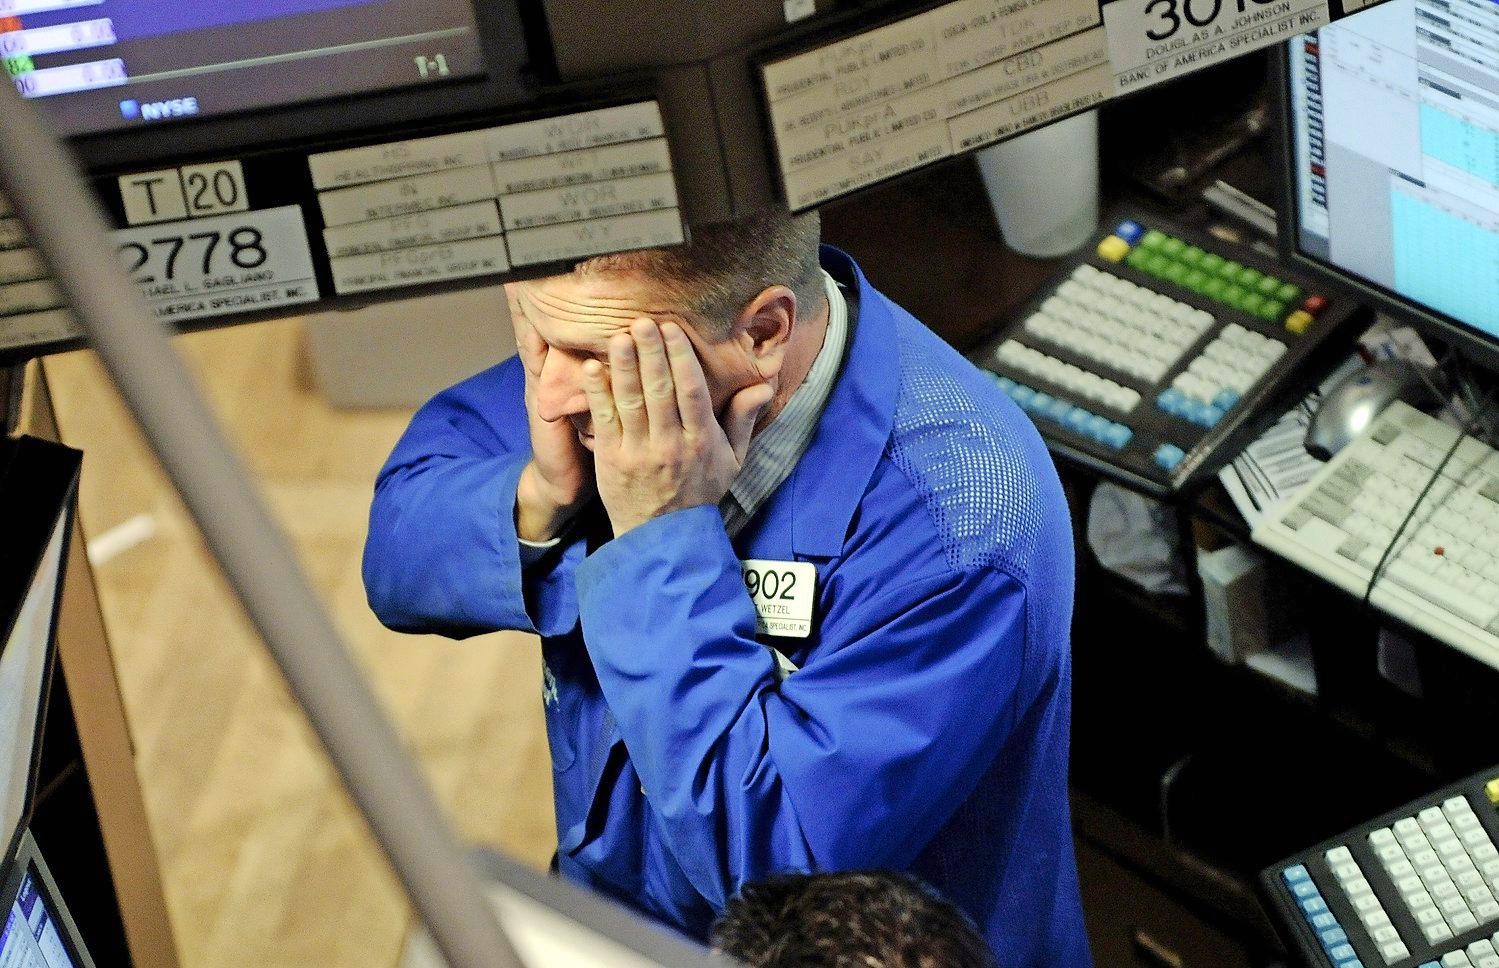 A trader works on the floor of the New York Stock Exchange at the start of the trading day in New York, New York, USA, on 07 October 2008. Stock market trading around the world Tuesday was uneven as investors appeared uncertain where to turn next in the ongoing international financial turmoil and new trouble spots emerging. In data underlining the extent of the crisis, the International Monetary Fund warned that US financial sector losses could total 1.4 trillion dollars as a housing crisis at the centre of the global turmoil has yet to reach its peak.  (KEYSTONE/EPA/JUSTIN LANE) USA WALL STREET